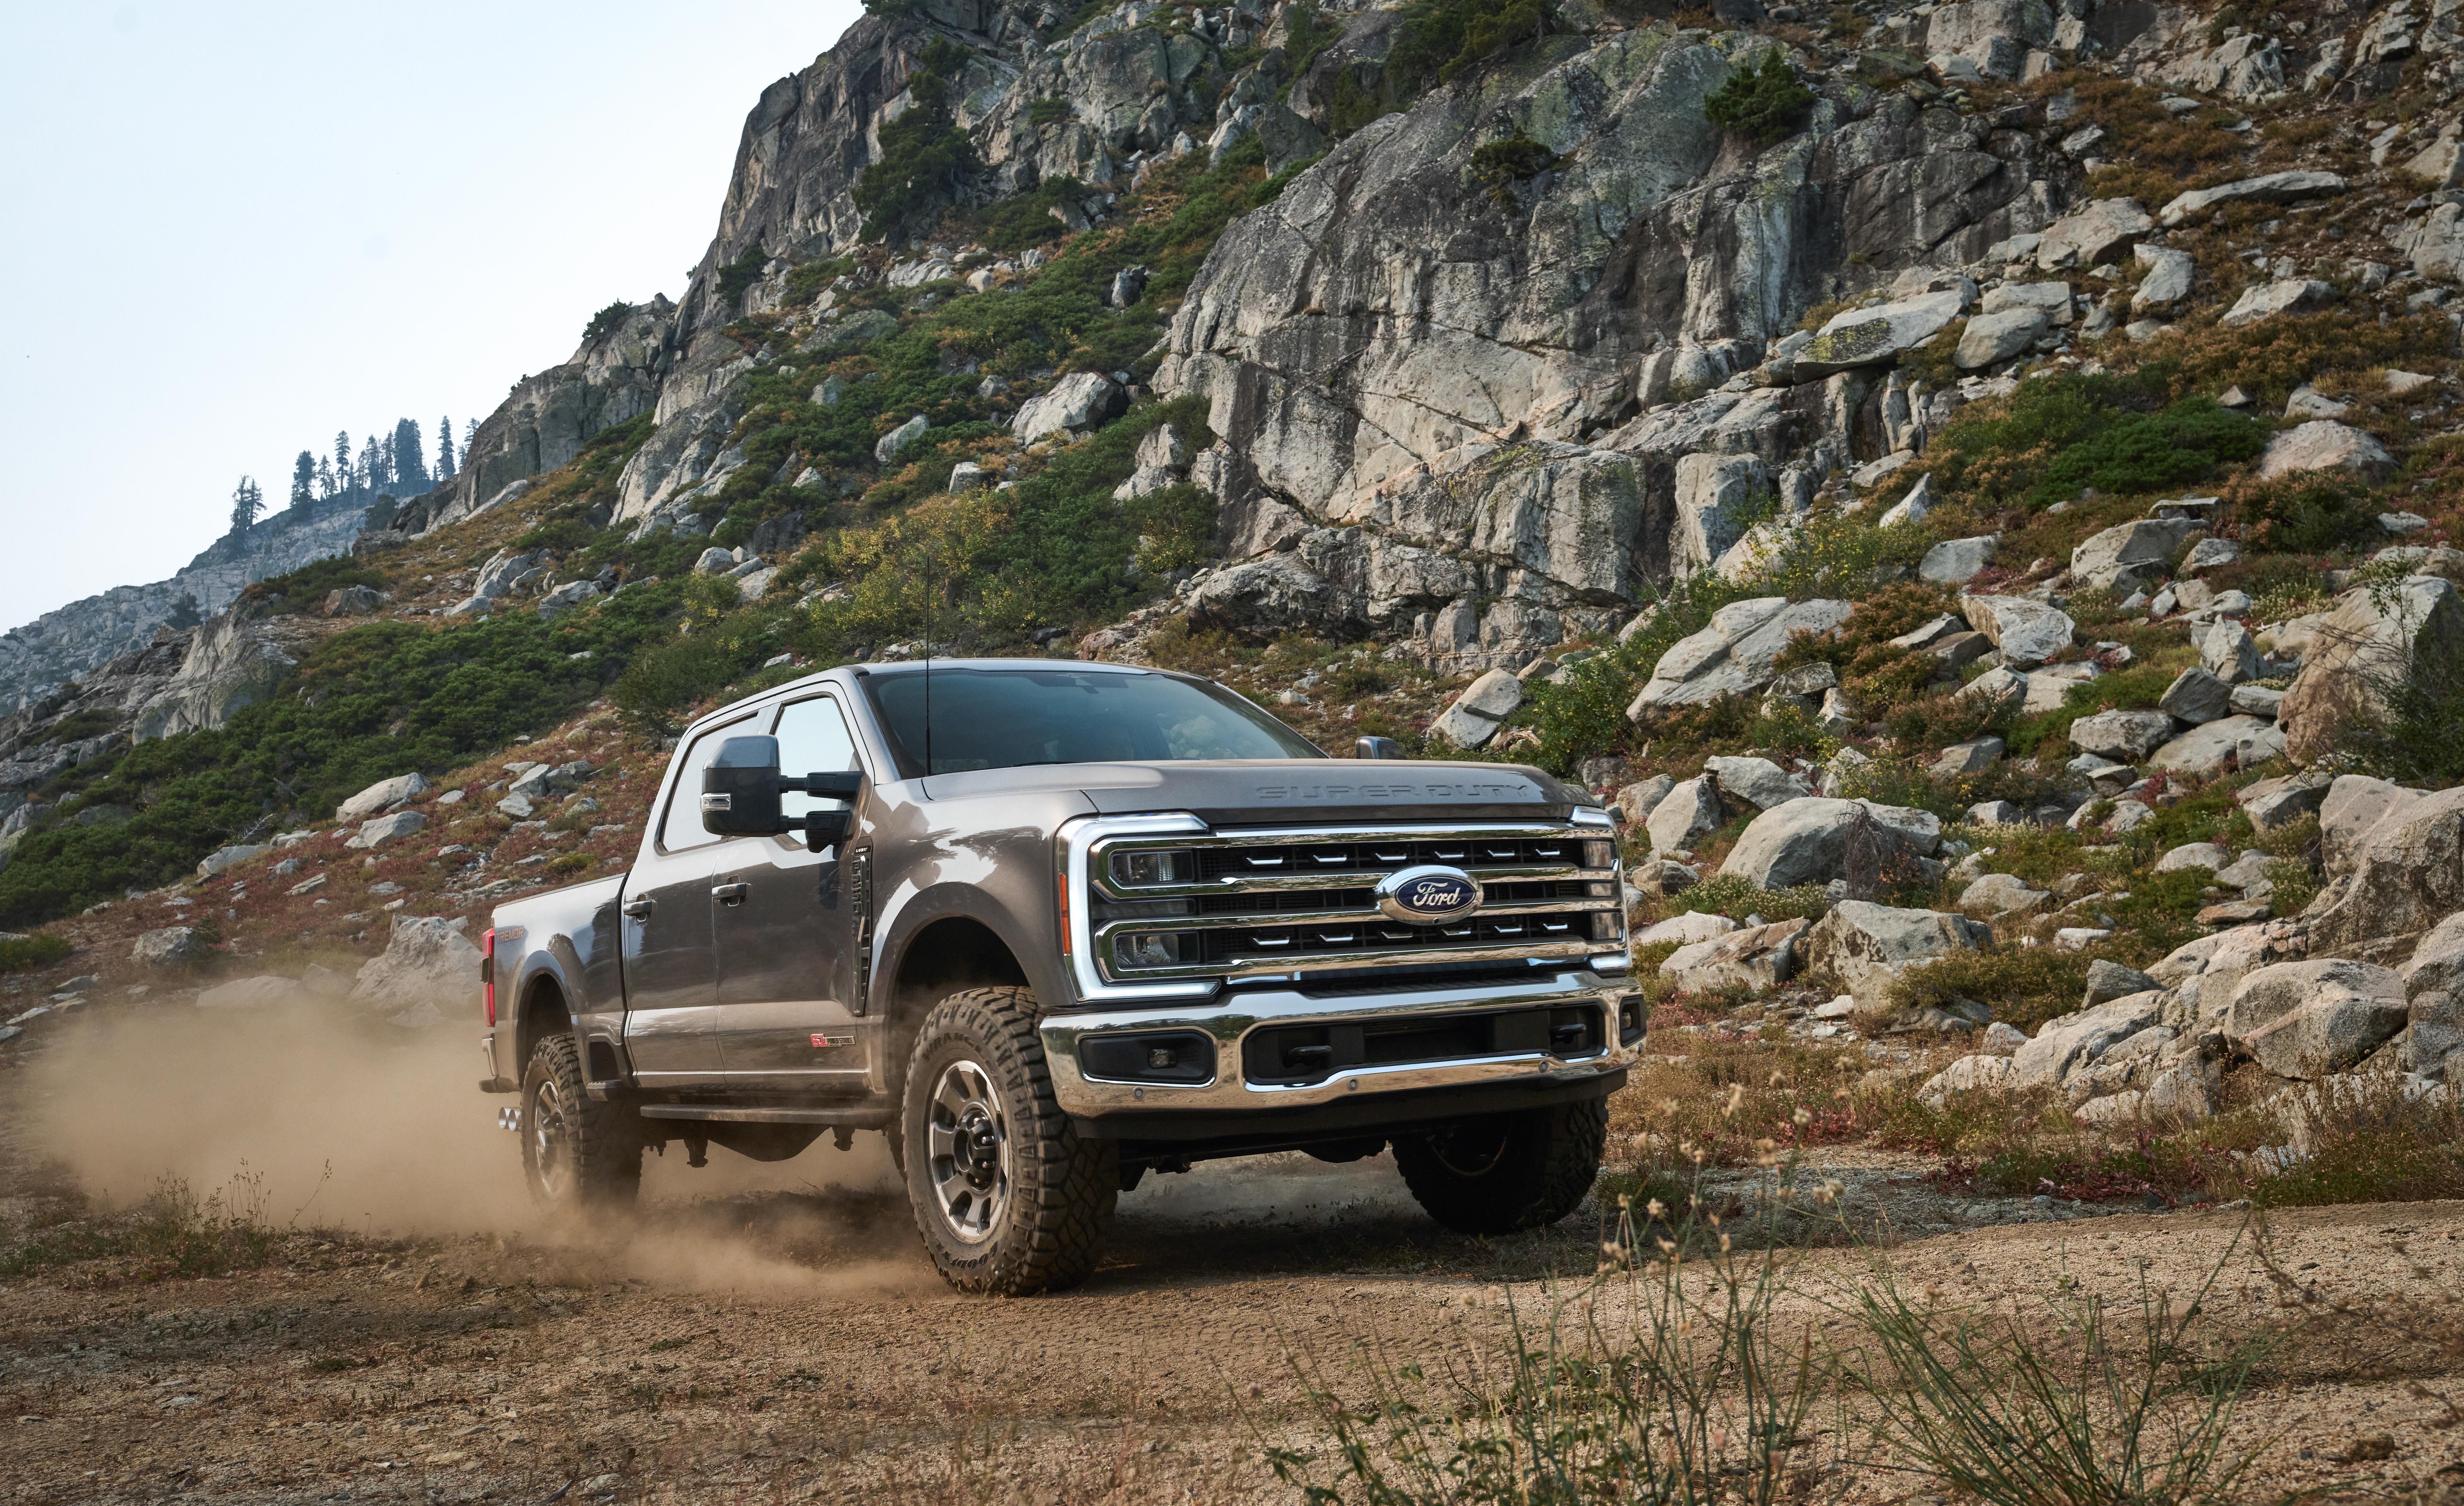 2023 Ford Super Duty: What We Know So Far